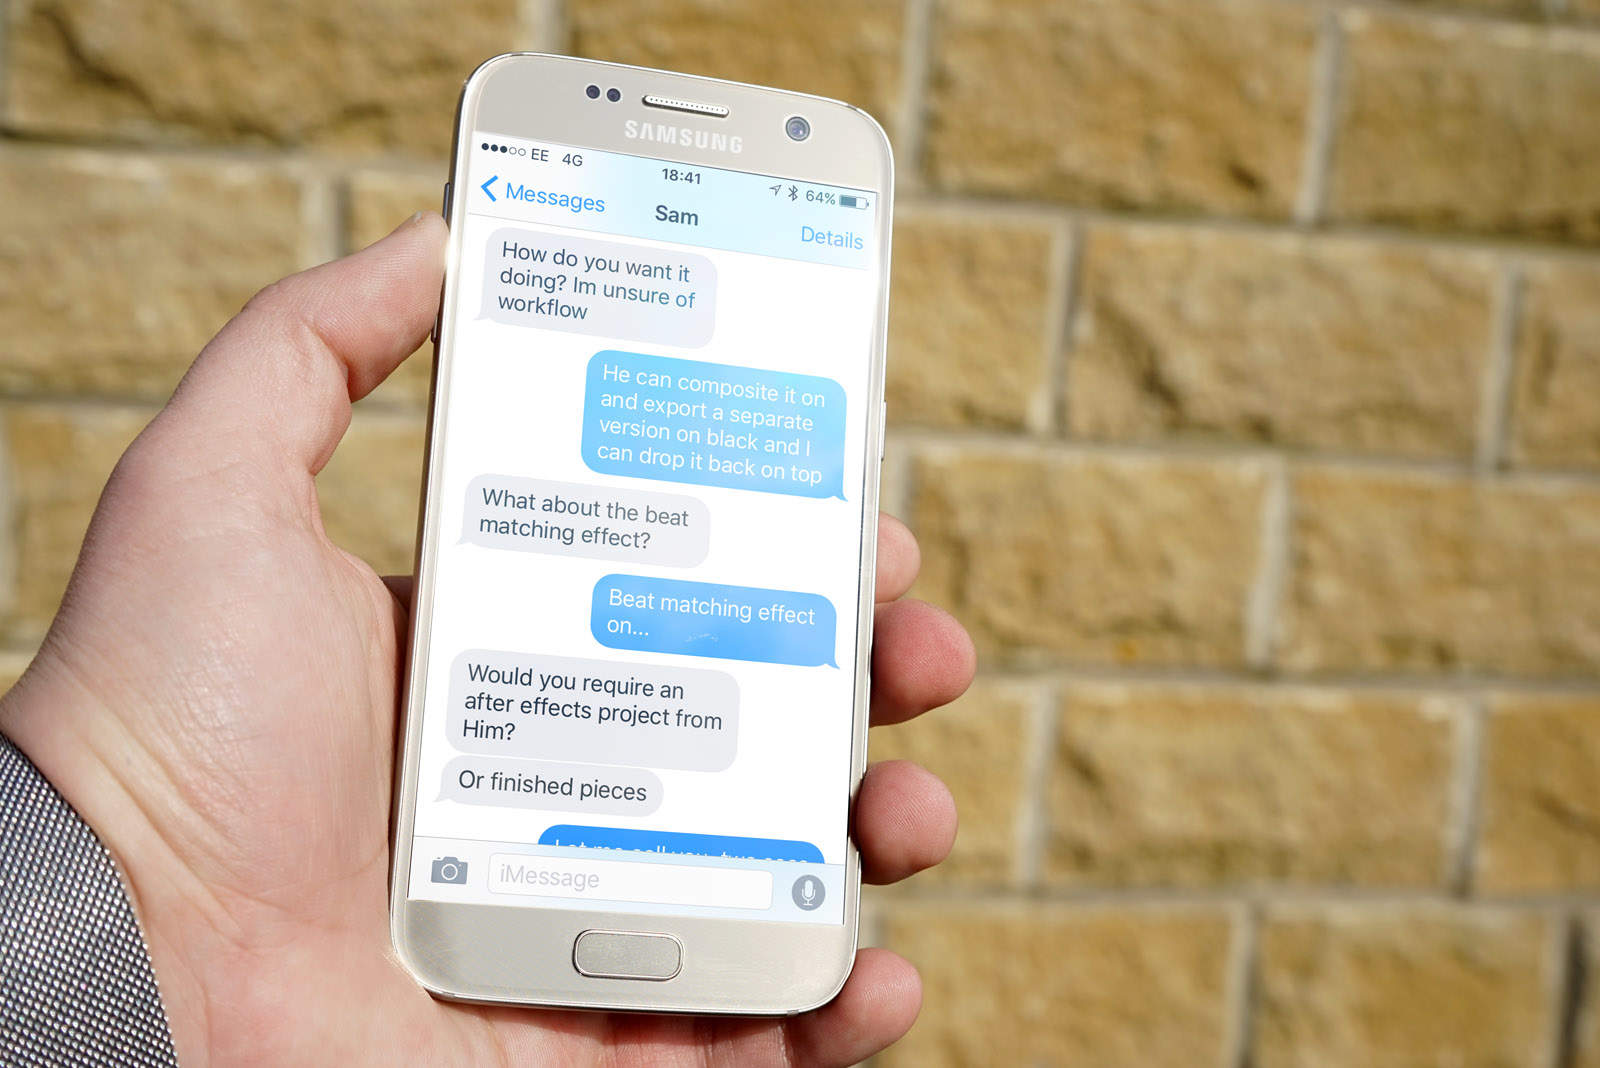 Your Android friends may soon get blue chat bubbles too.